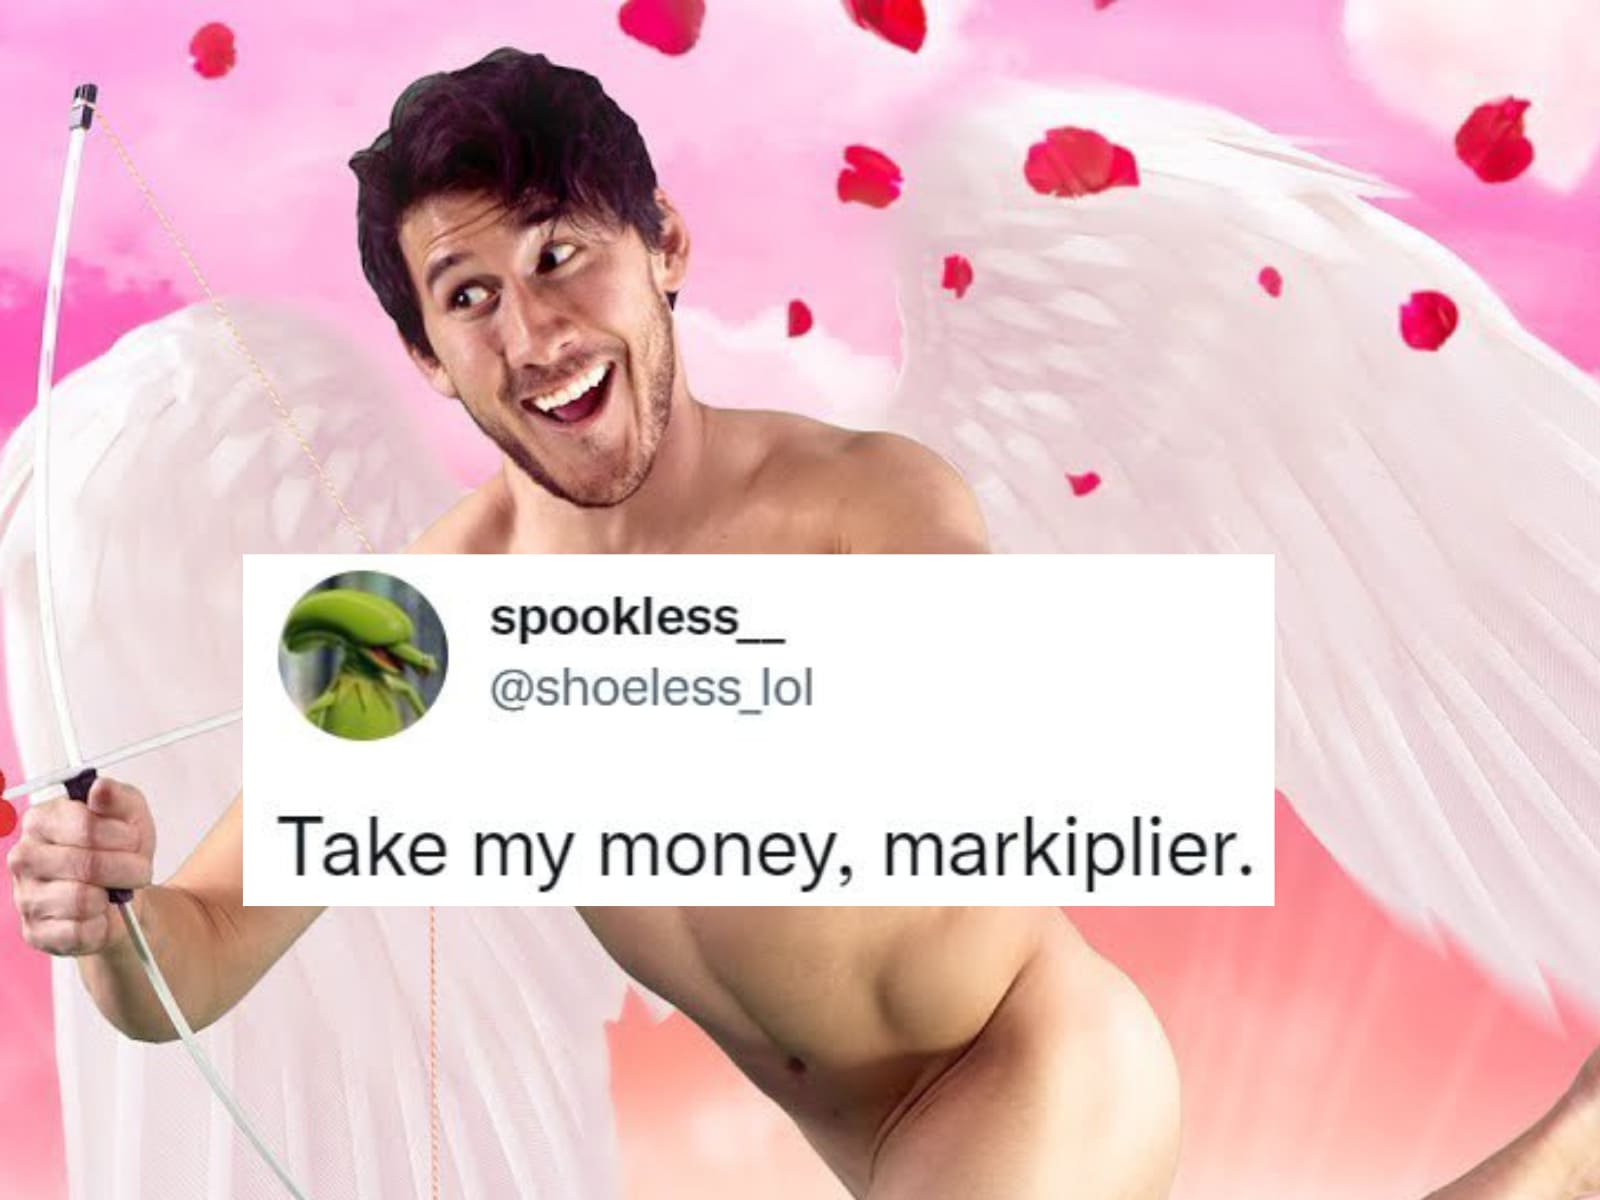 How Much Has Markiplier Made Off Onlyfans